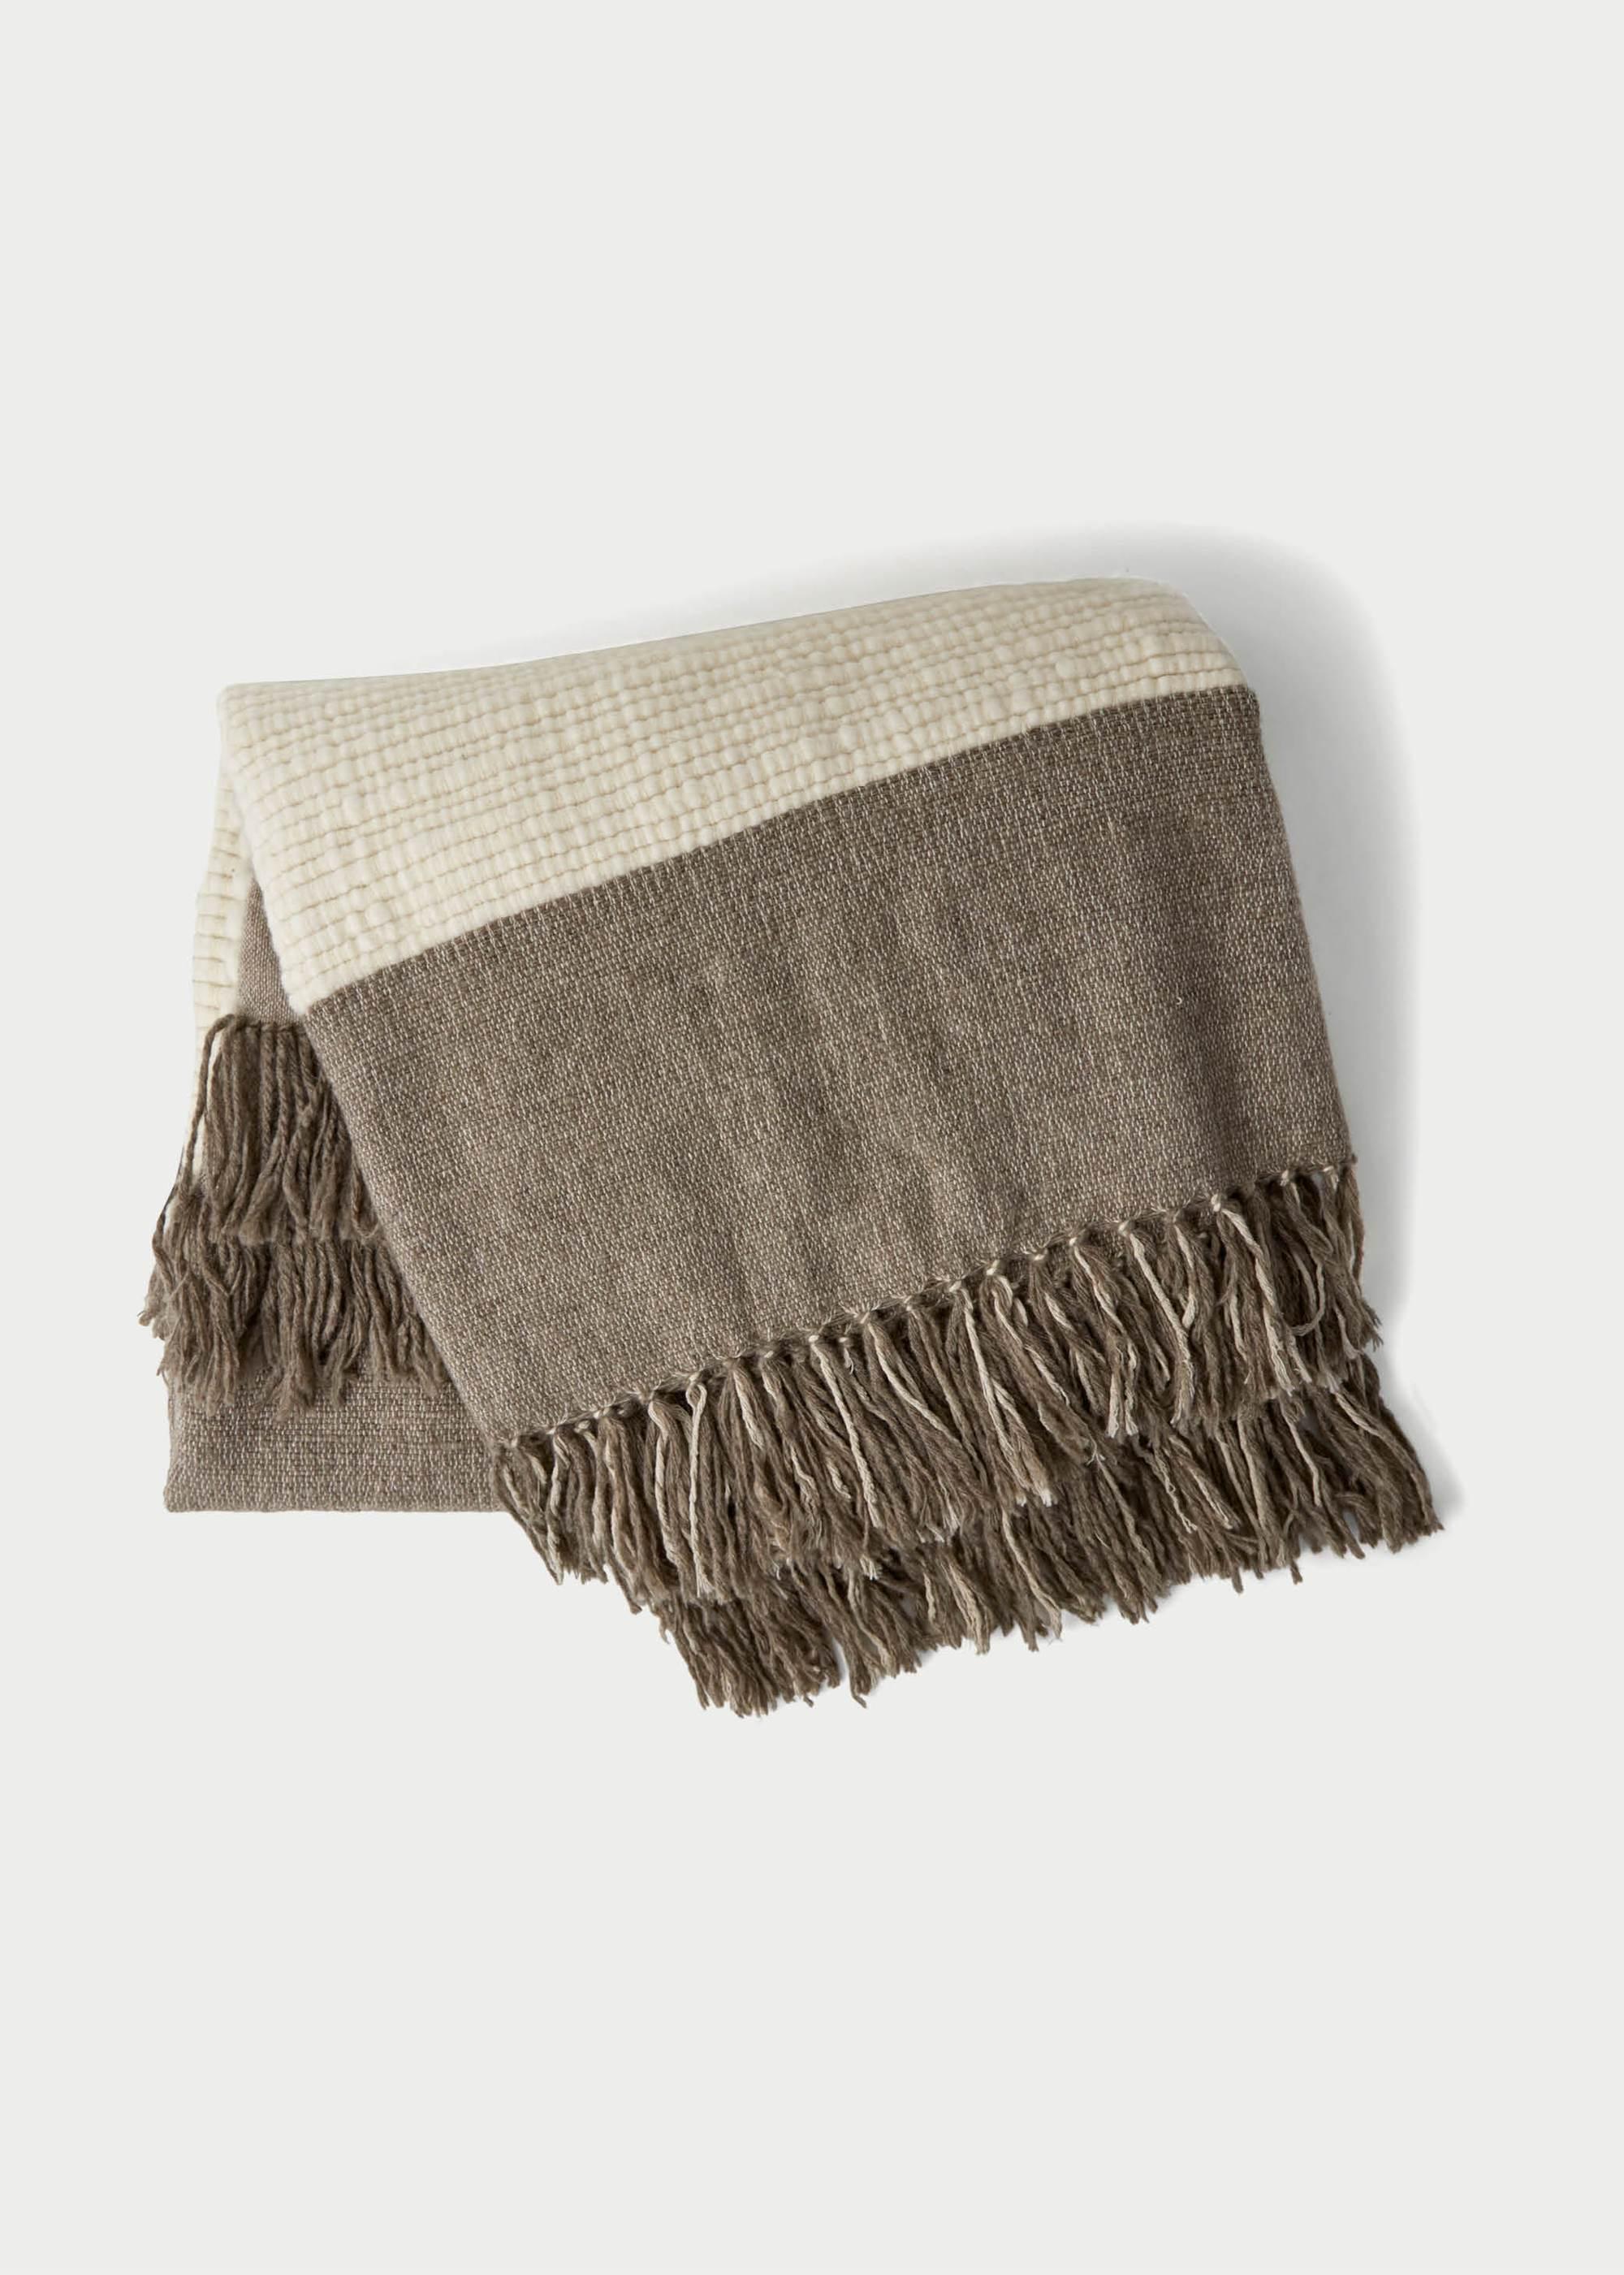 Nepal’s untamed landscapes and rugged nature are at the heart of the inspiration behind our Ja?gali Blanket. Like the wild mountain ranges of the Himalayas, Ja?gali weaves together a contrasting collection of adventurous textures to create a